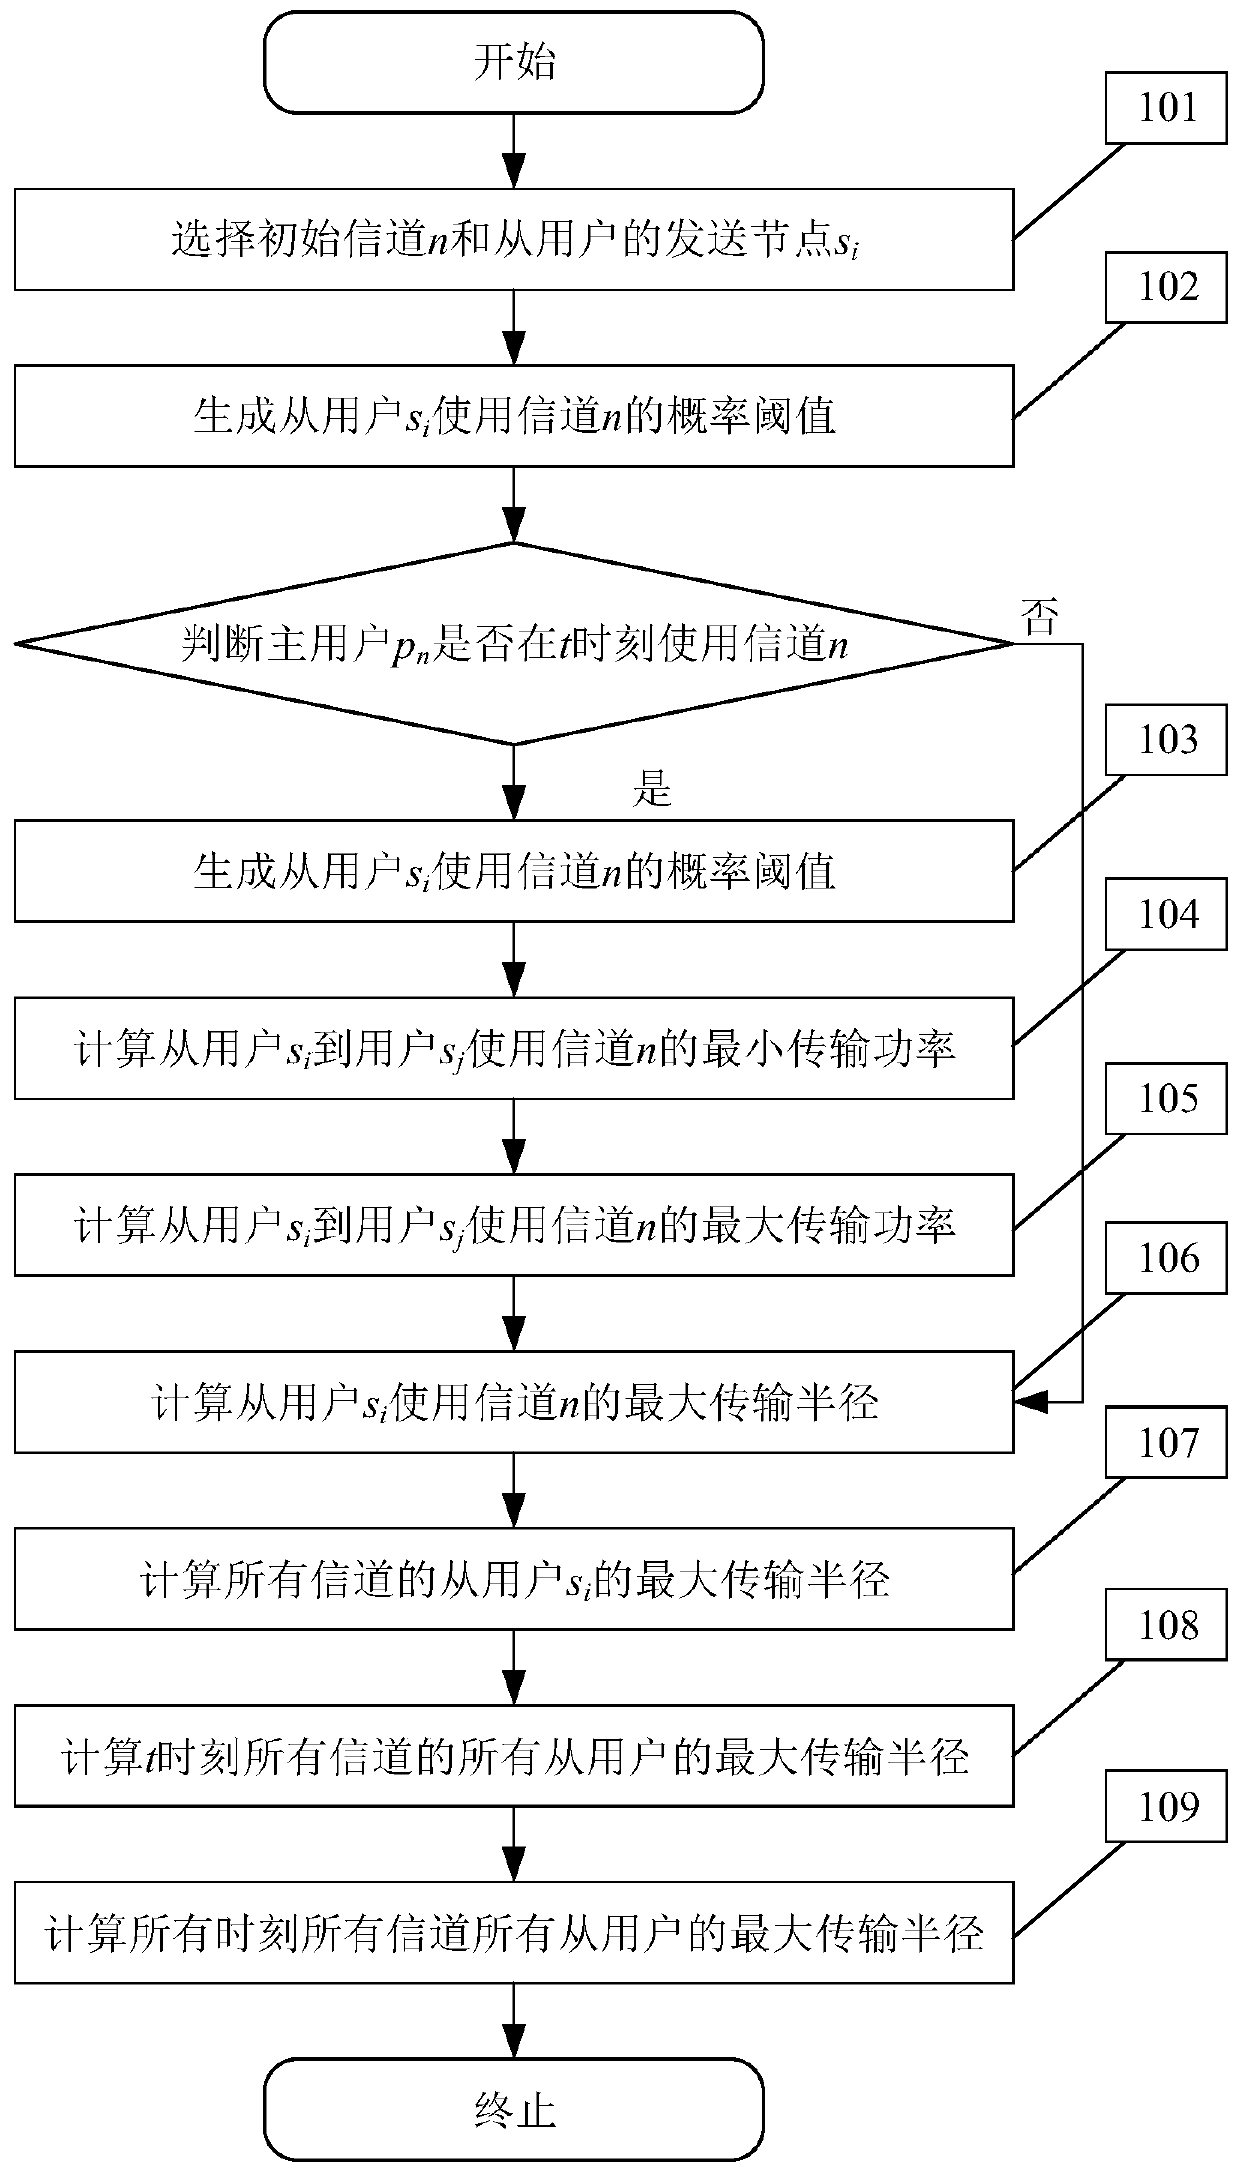 Cognitive network dynamic access method oriented to network service characteristics